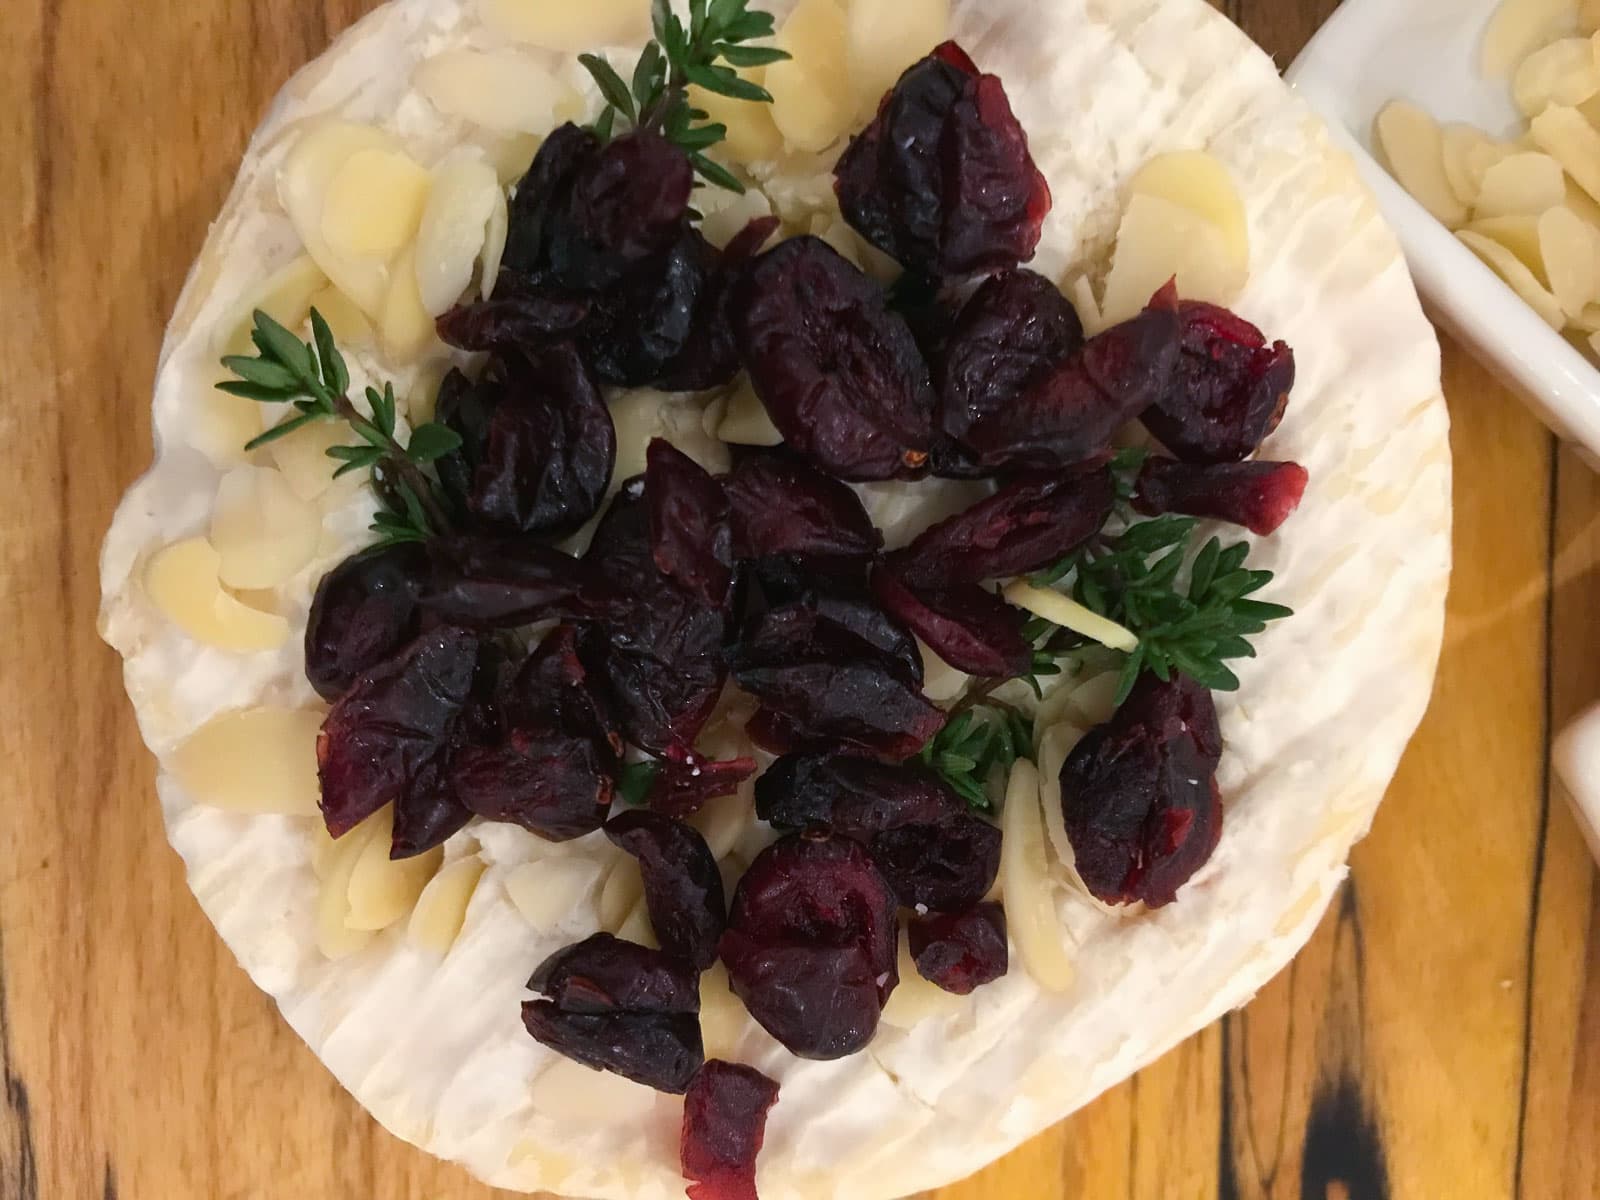 A whole Camembert cheese with toppings of dried cranberries, sliced almonds and thyme to be baked.